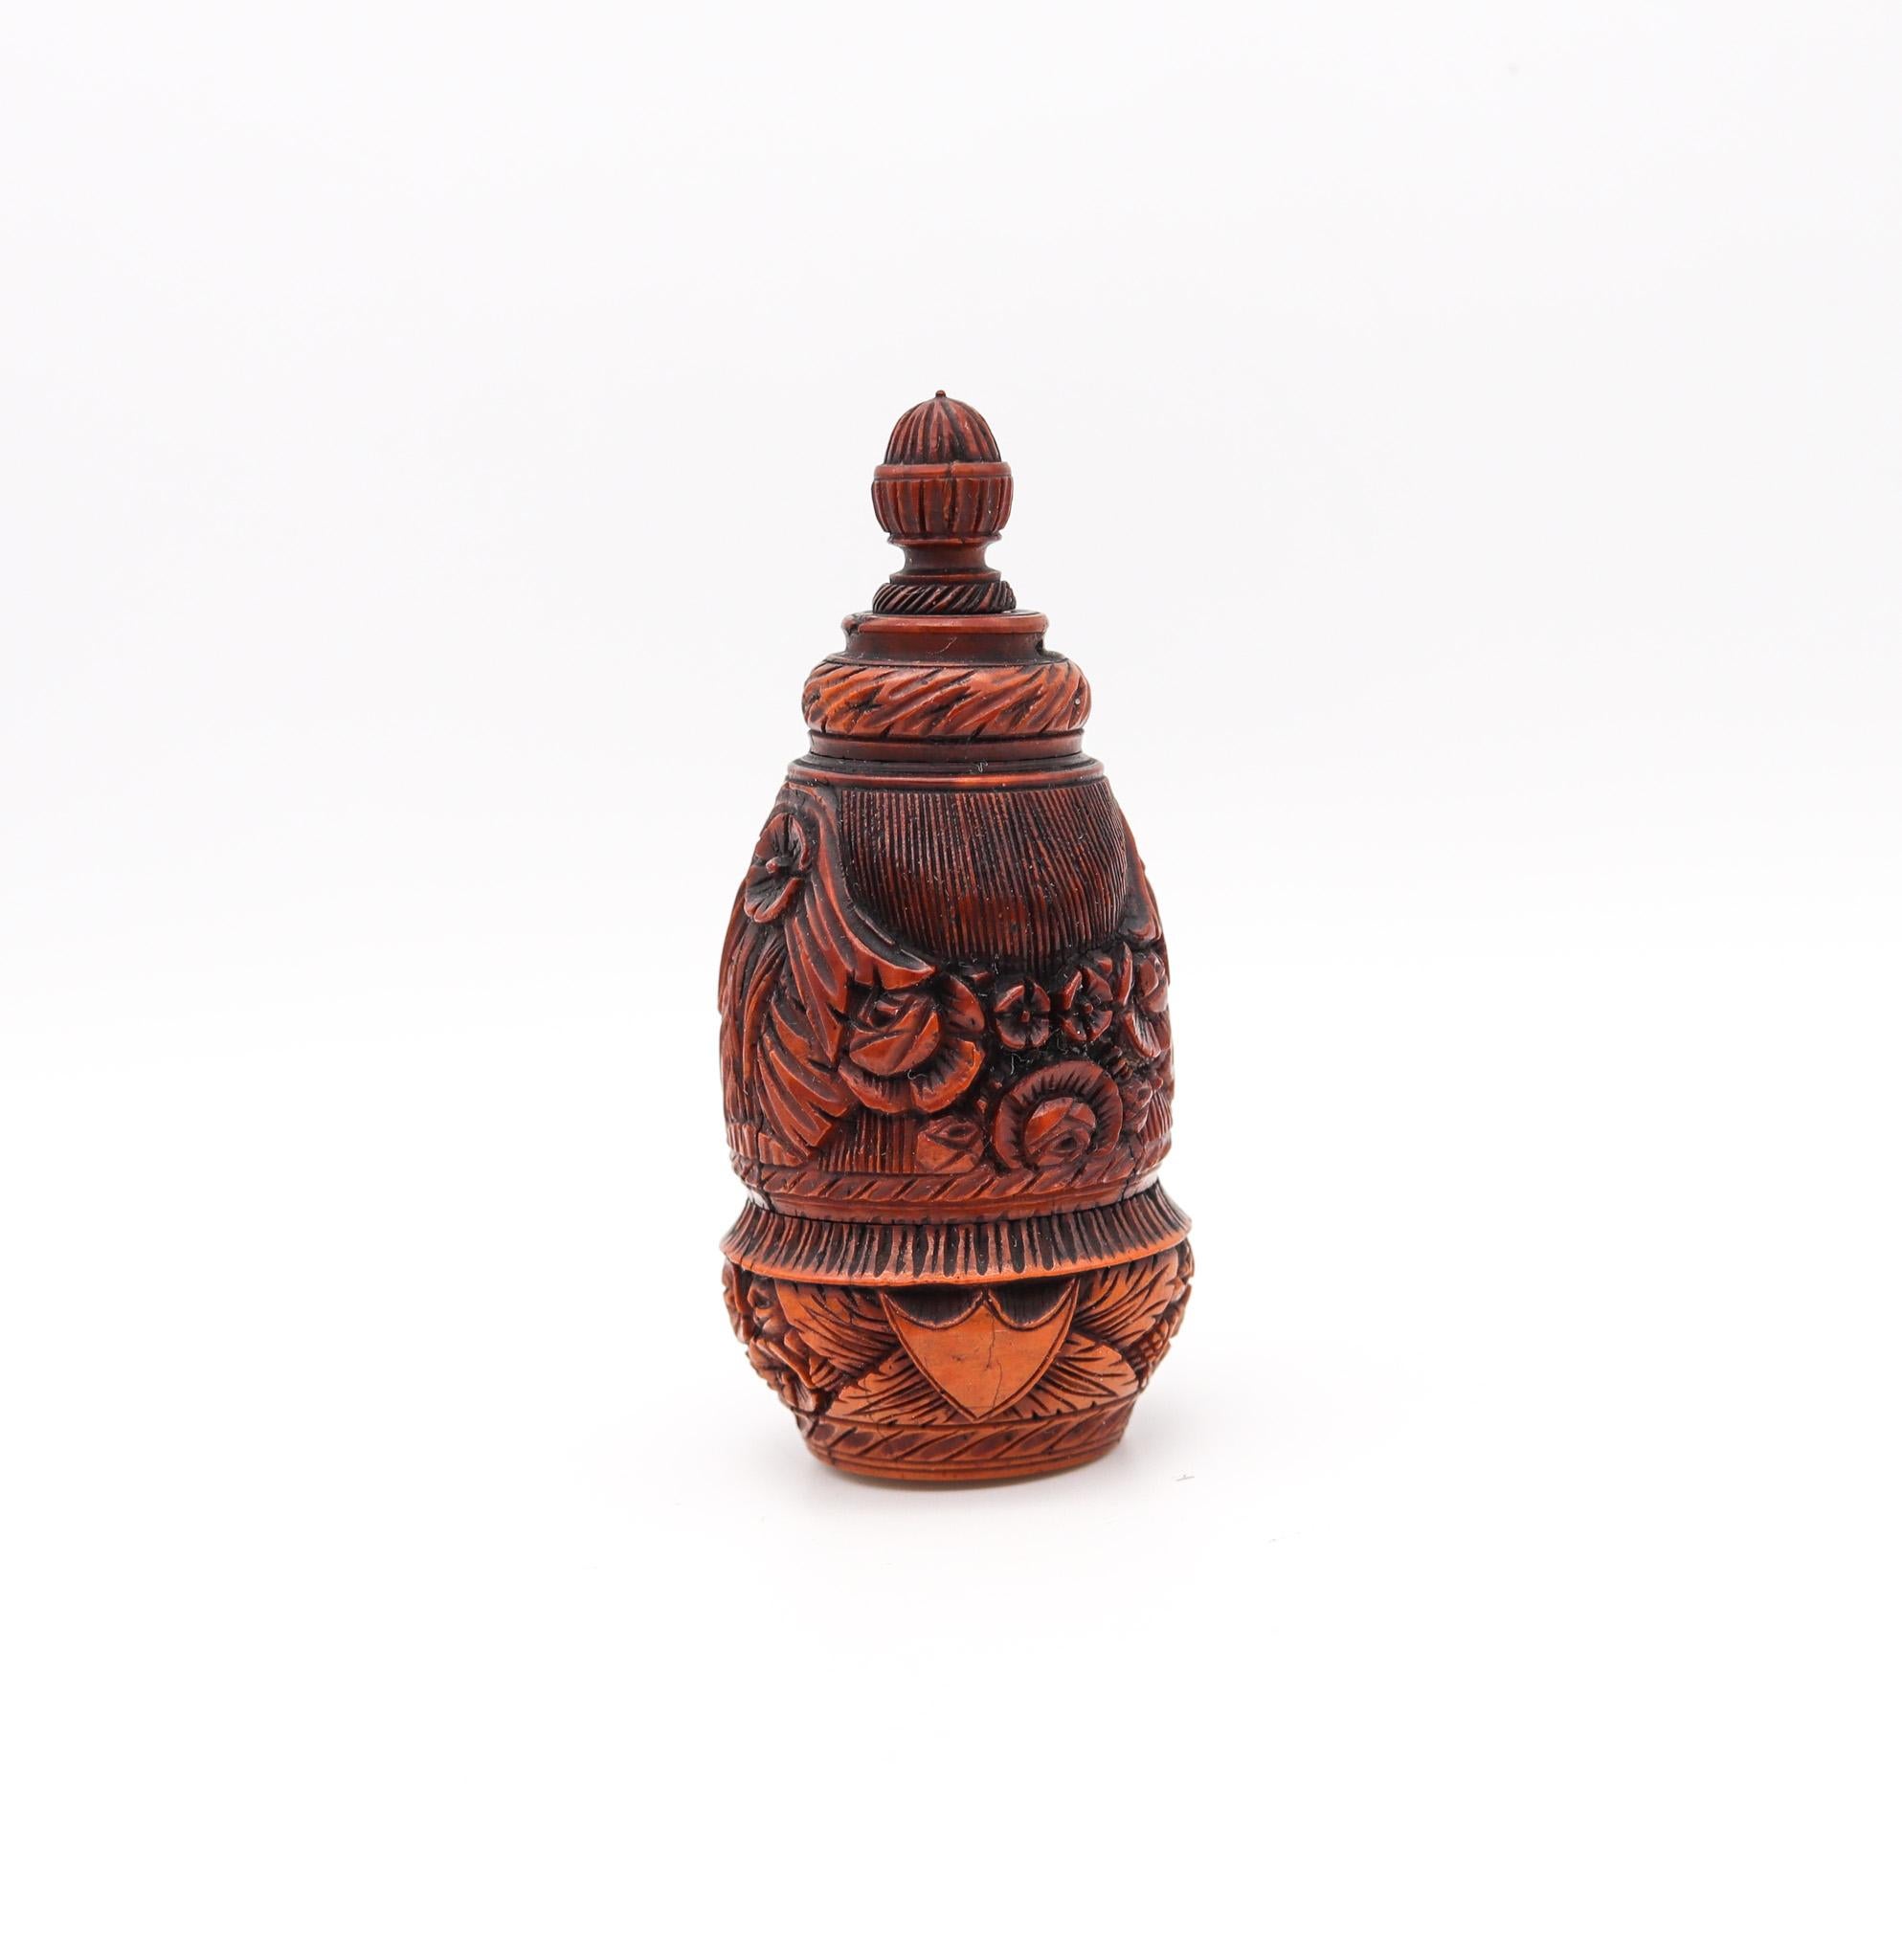 Pocket snuff flask carved from coquille nut.

Amazing small pocket snuff bottle, carved from a large coquille nut. This antique piece was created in the shape of a spinning top with two secret compartments which can be unscrewed to open. Made in the